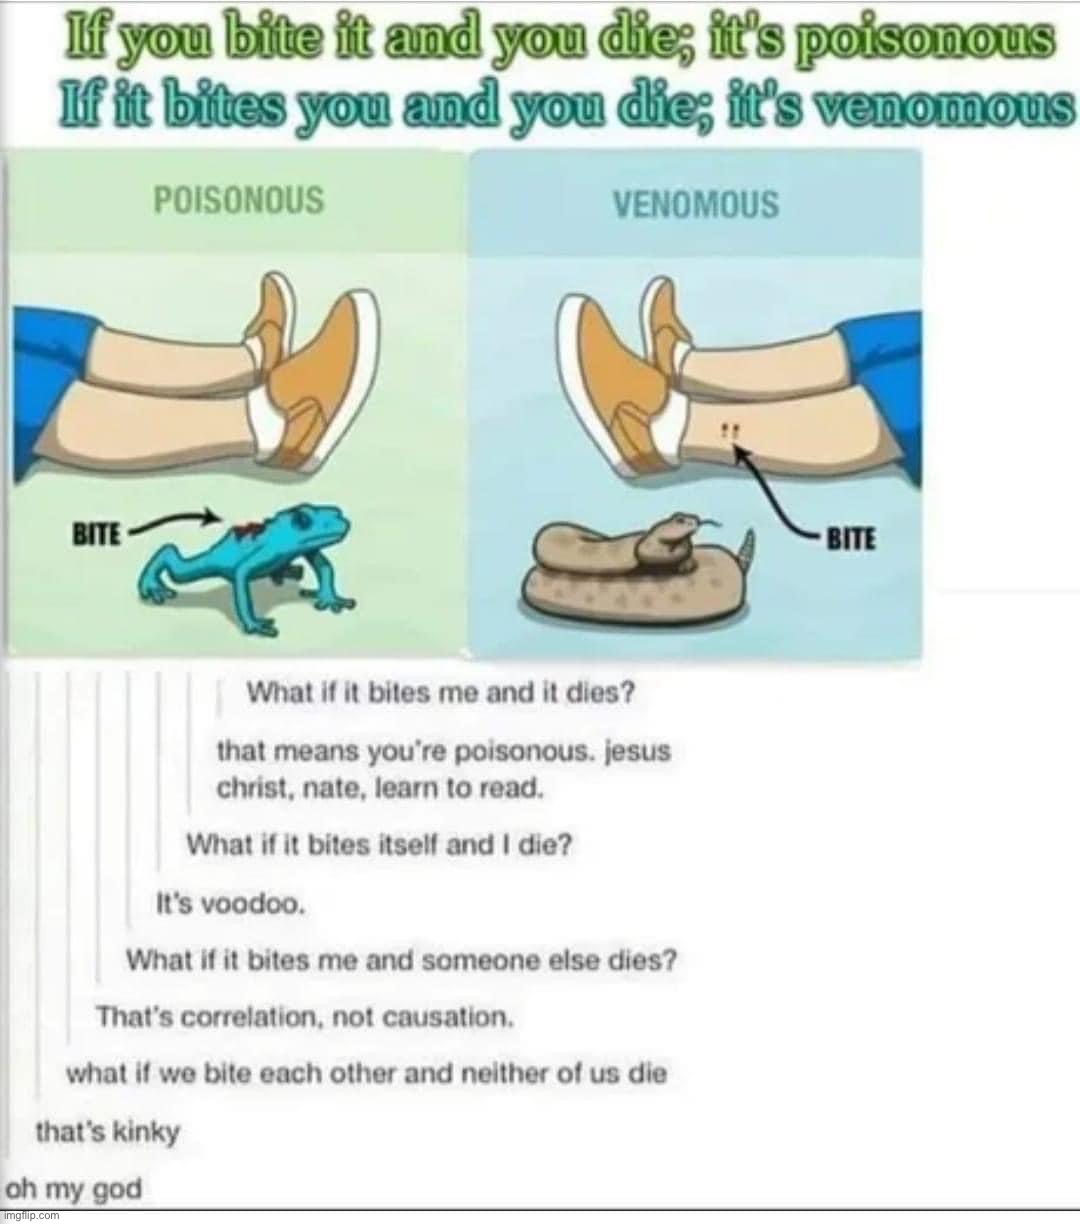 How to use proper vocabulary whilst dying | image tagged in poisonous vs venomous | made w/ Imgflip meme maker